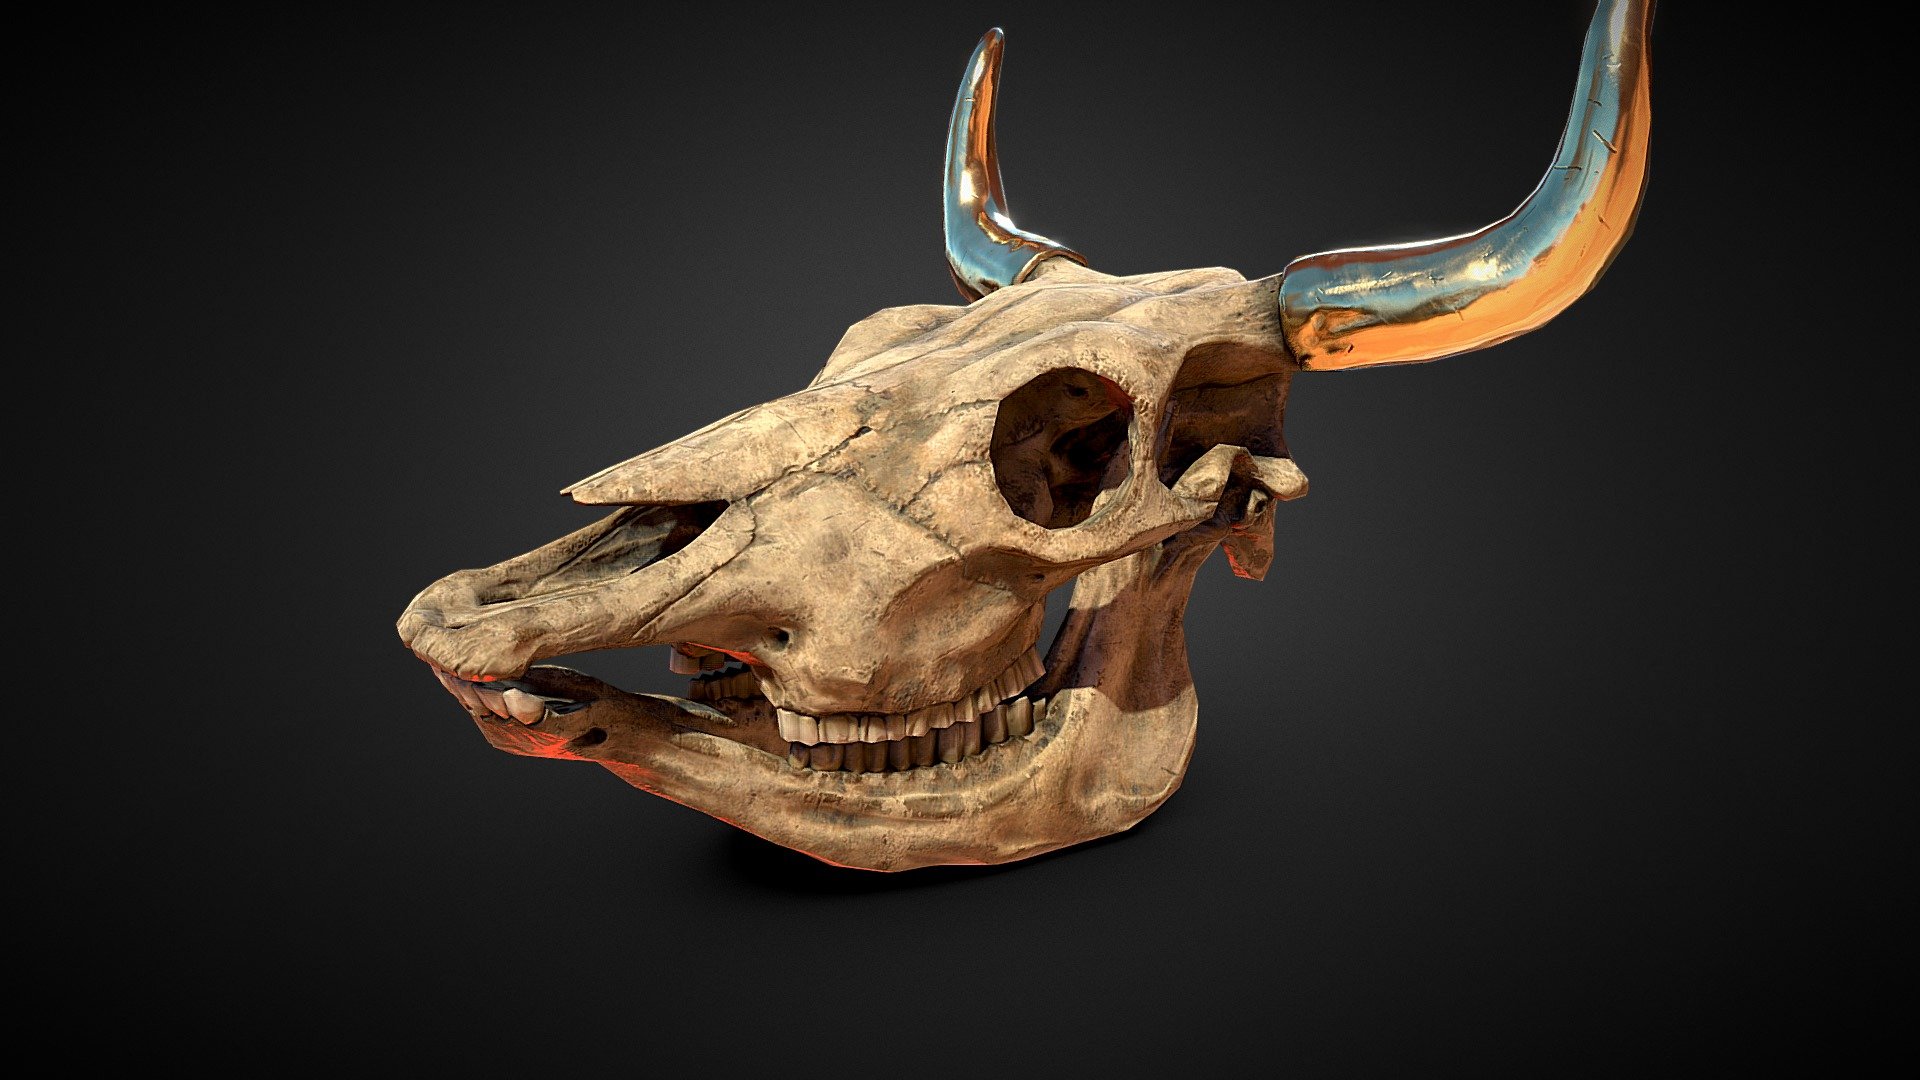 W.i.p 


Game Ready Cow skull



Highly optimised AAA game ready asset with

2k textures

PBR metal roughness maps

4124 polygons for whole skull


My workflow



Modelled base mesh for sculpt in 3DsMax

Sculpted details in Zbrush

Modified base mesh for low poly in 3DsMax

Baked and textured in Substance Painter
Update: Beefed up normals in z brush, tweaked anatomy and added more dramatic lighting
 - Cow Skull - Buy Royalty Free 3D model by jimmyq 3d model